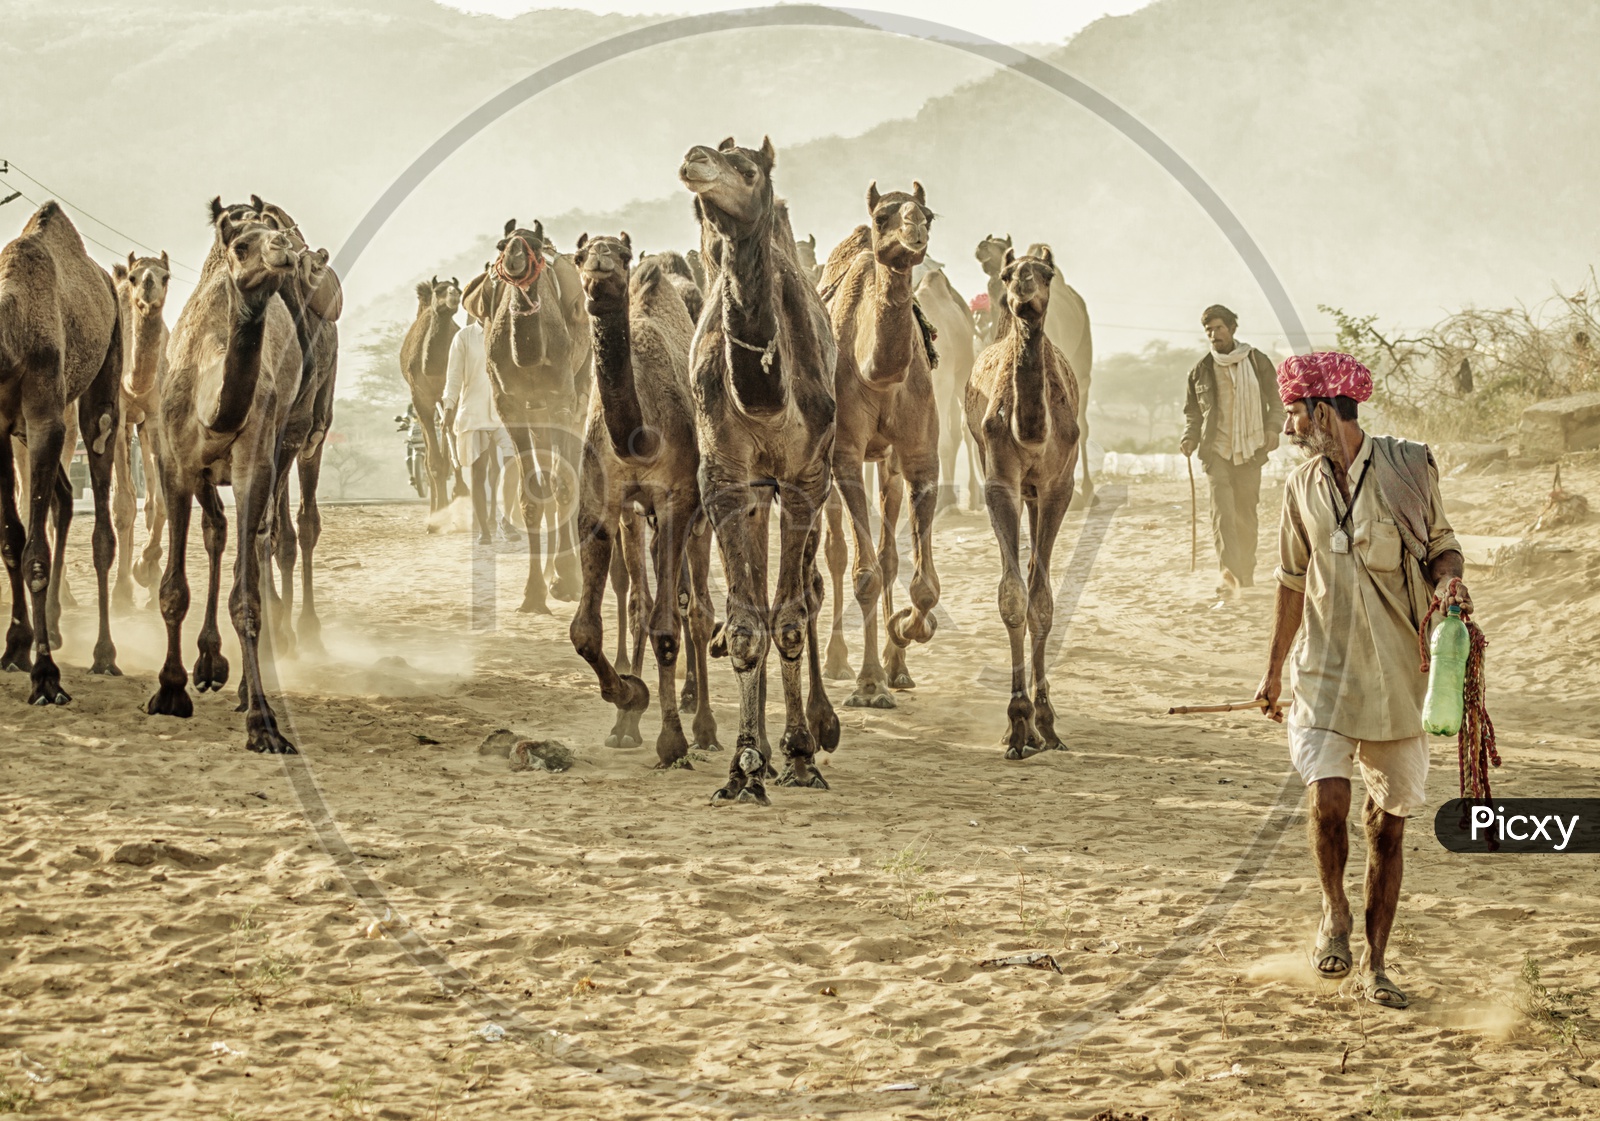 The Turban Man With His herd of Camels.